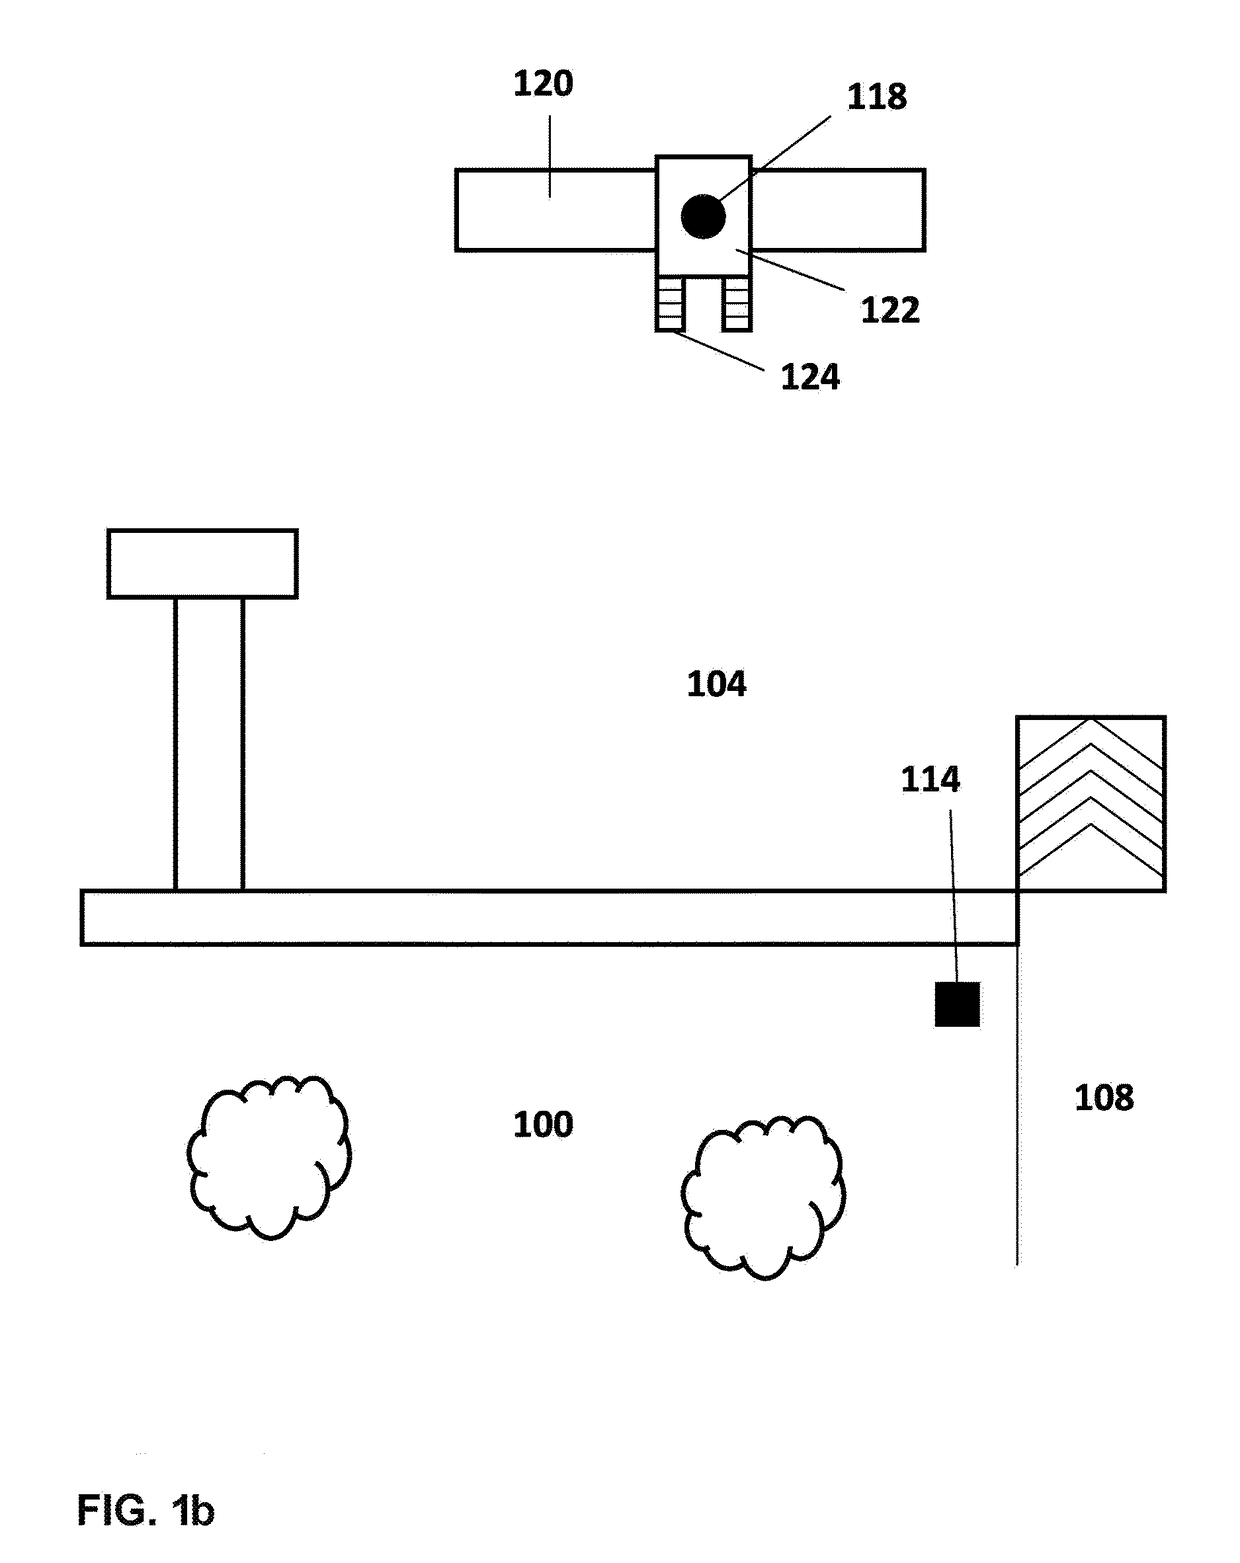 Method and Apparatus for Controlling Herbivore Fowl Populations